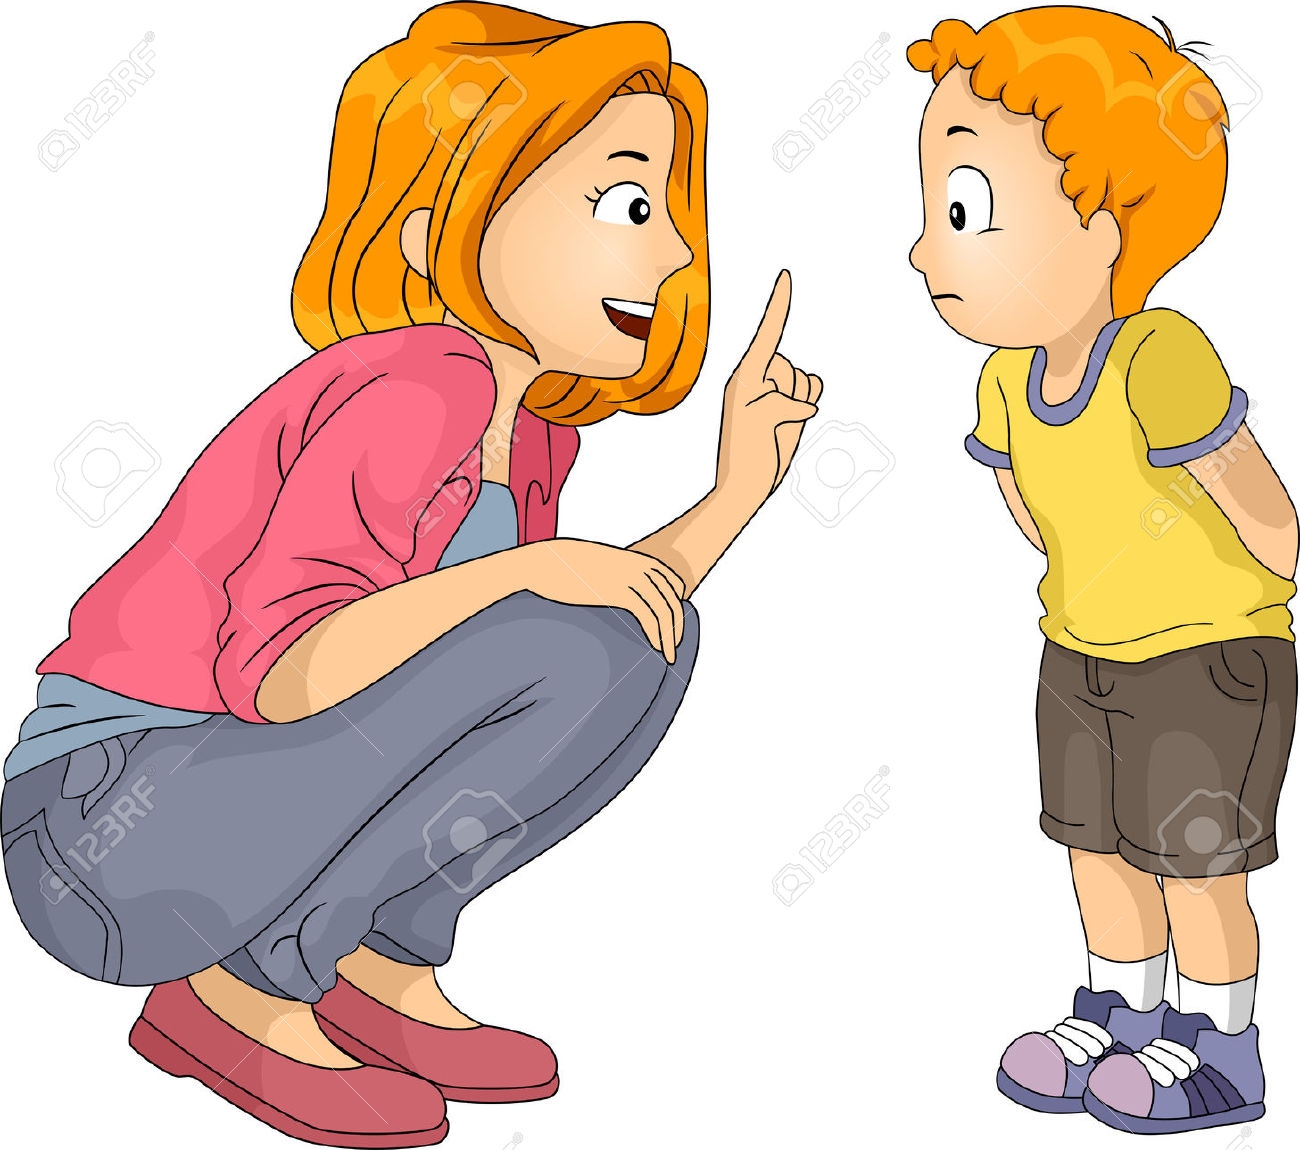 free clipart of mother and child - photo #31